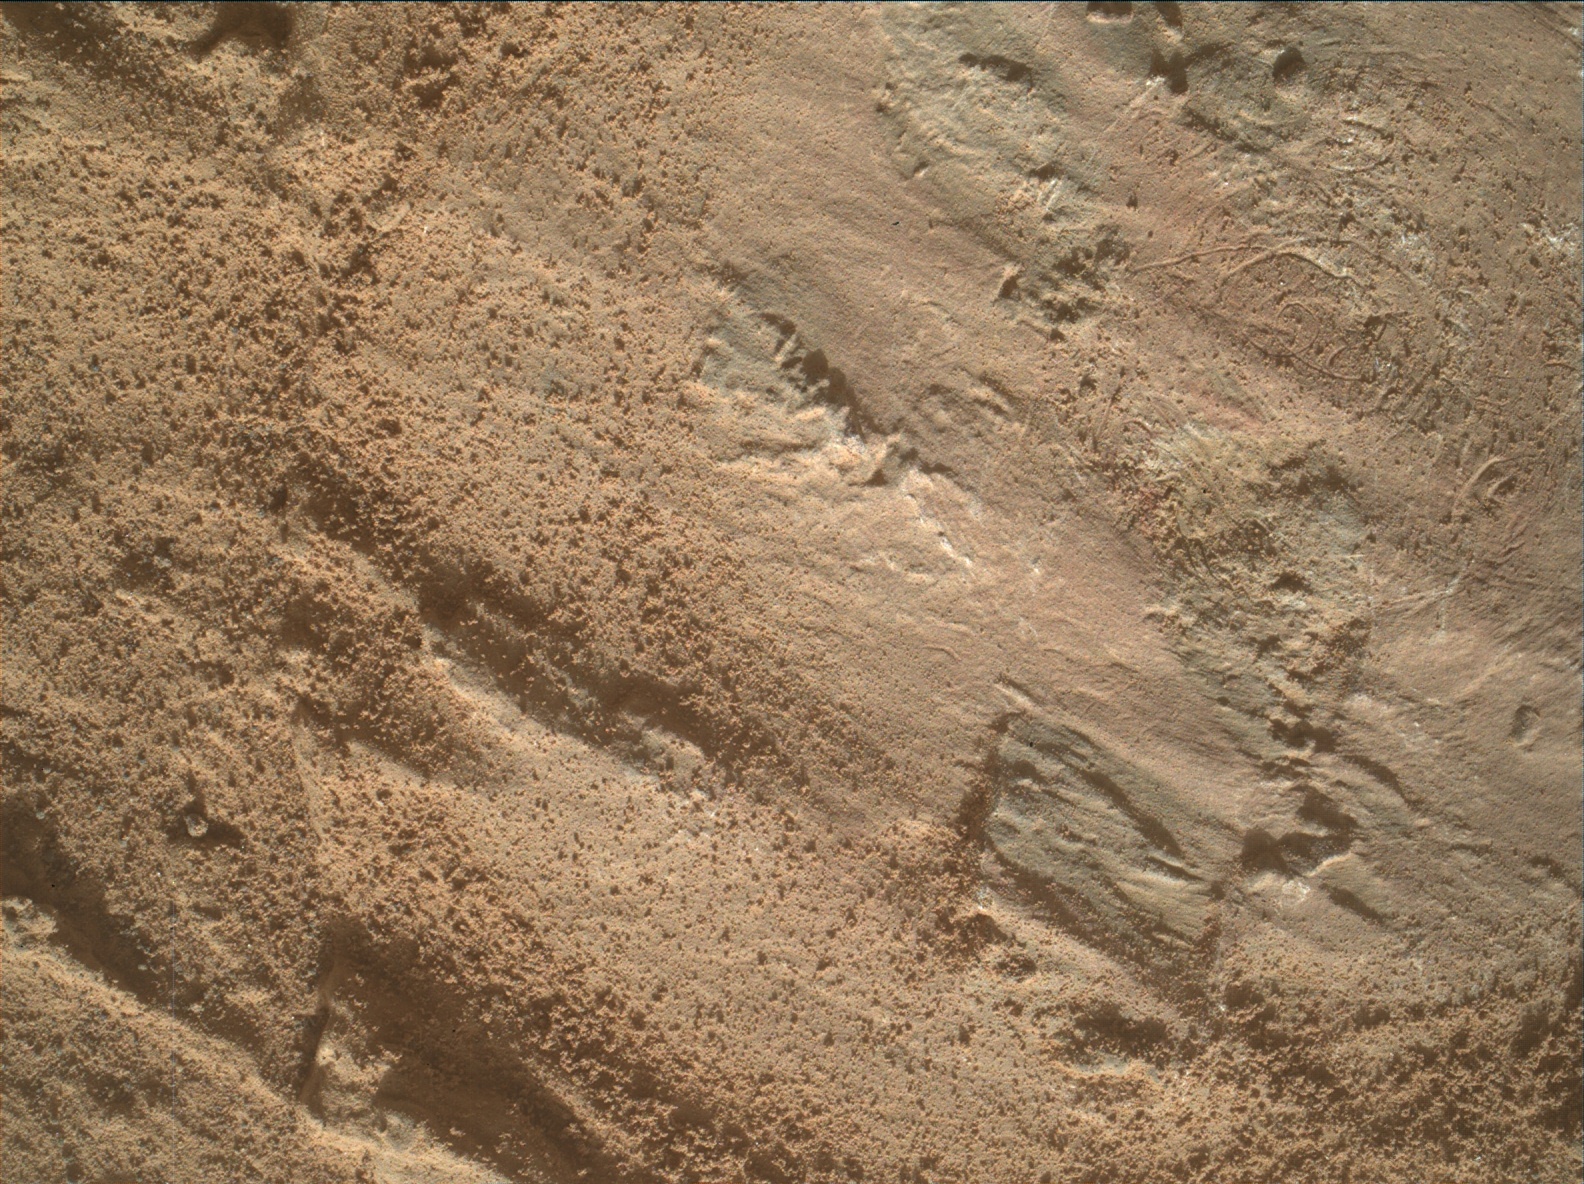 Nasa's Mars rover Curiosity acquired this image using its Mars Hand Lens Imager (MAHLI) on Sol 3202